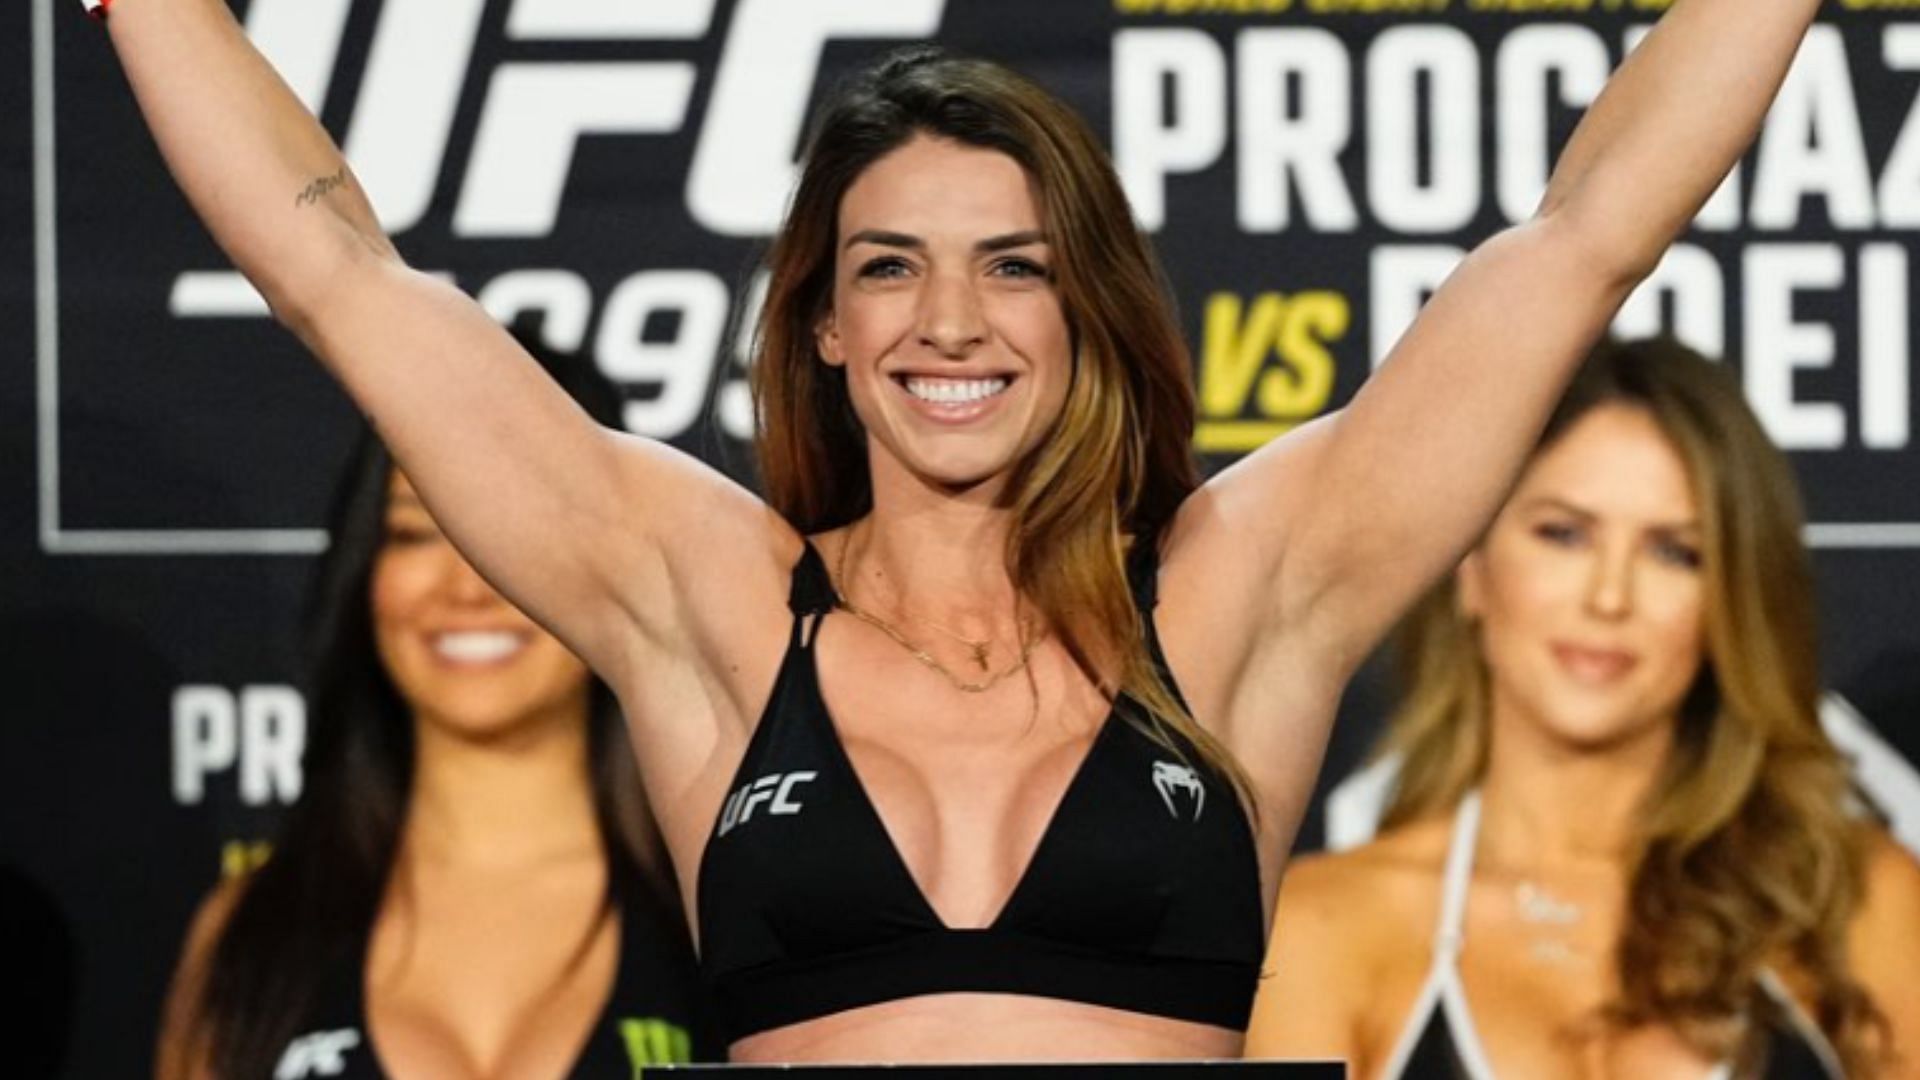 Mackenzie Dern responds to fan who questions why she is still fighting [Images courtesy of @mackenziedern on Instagram]